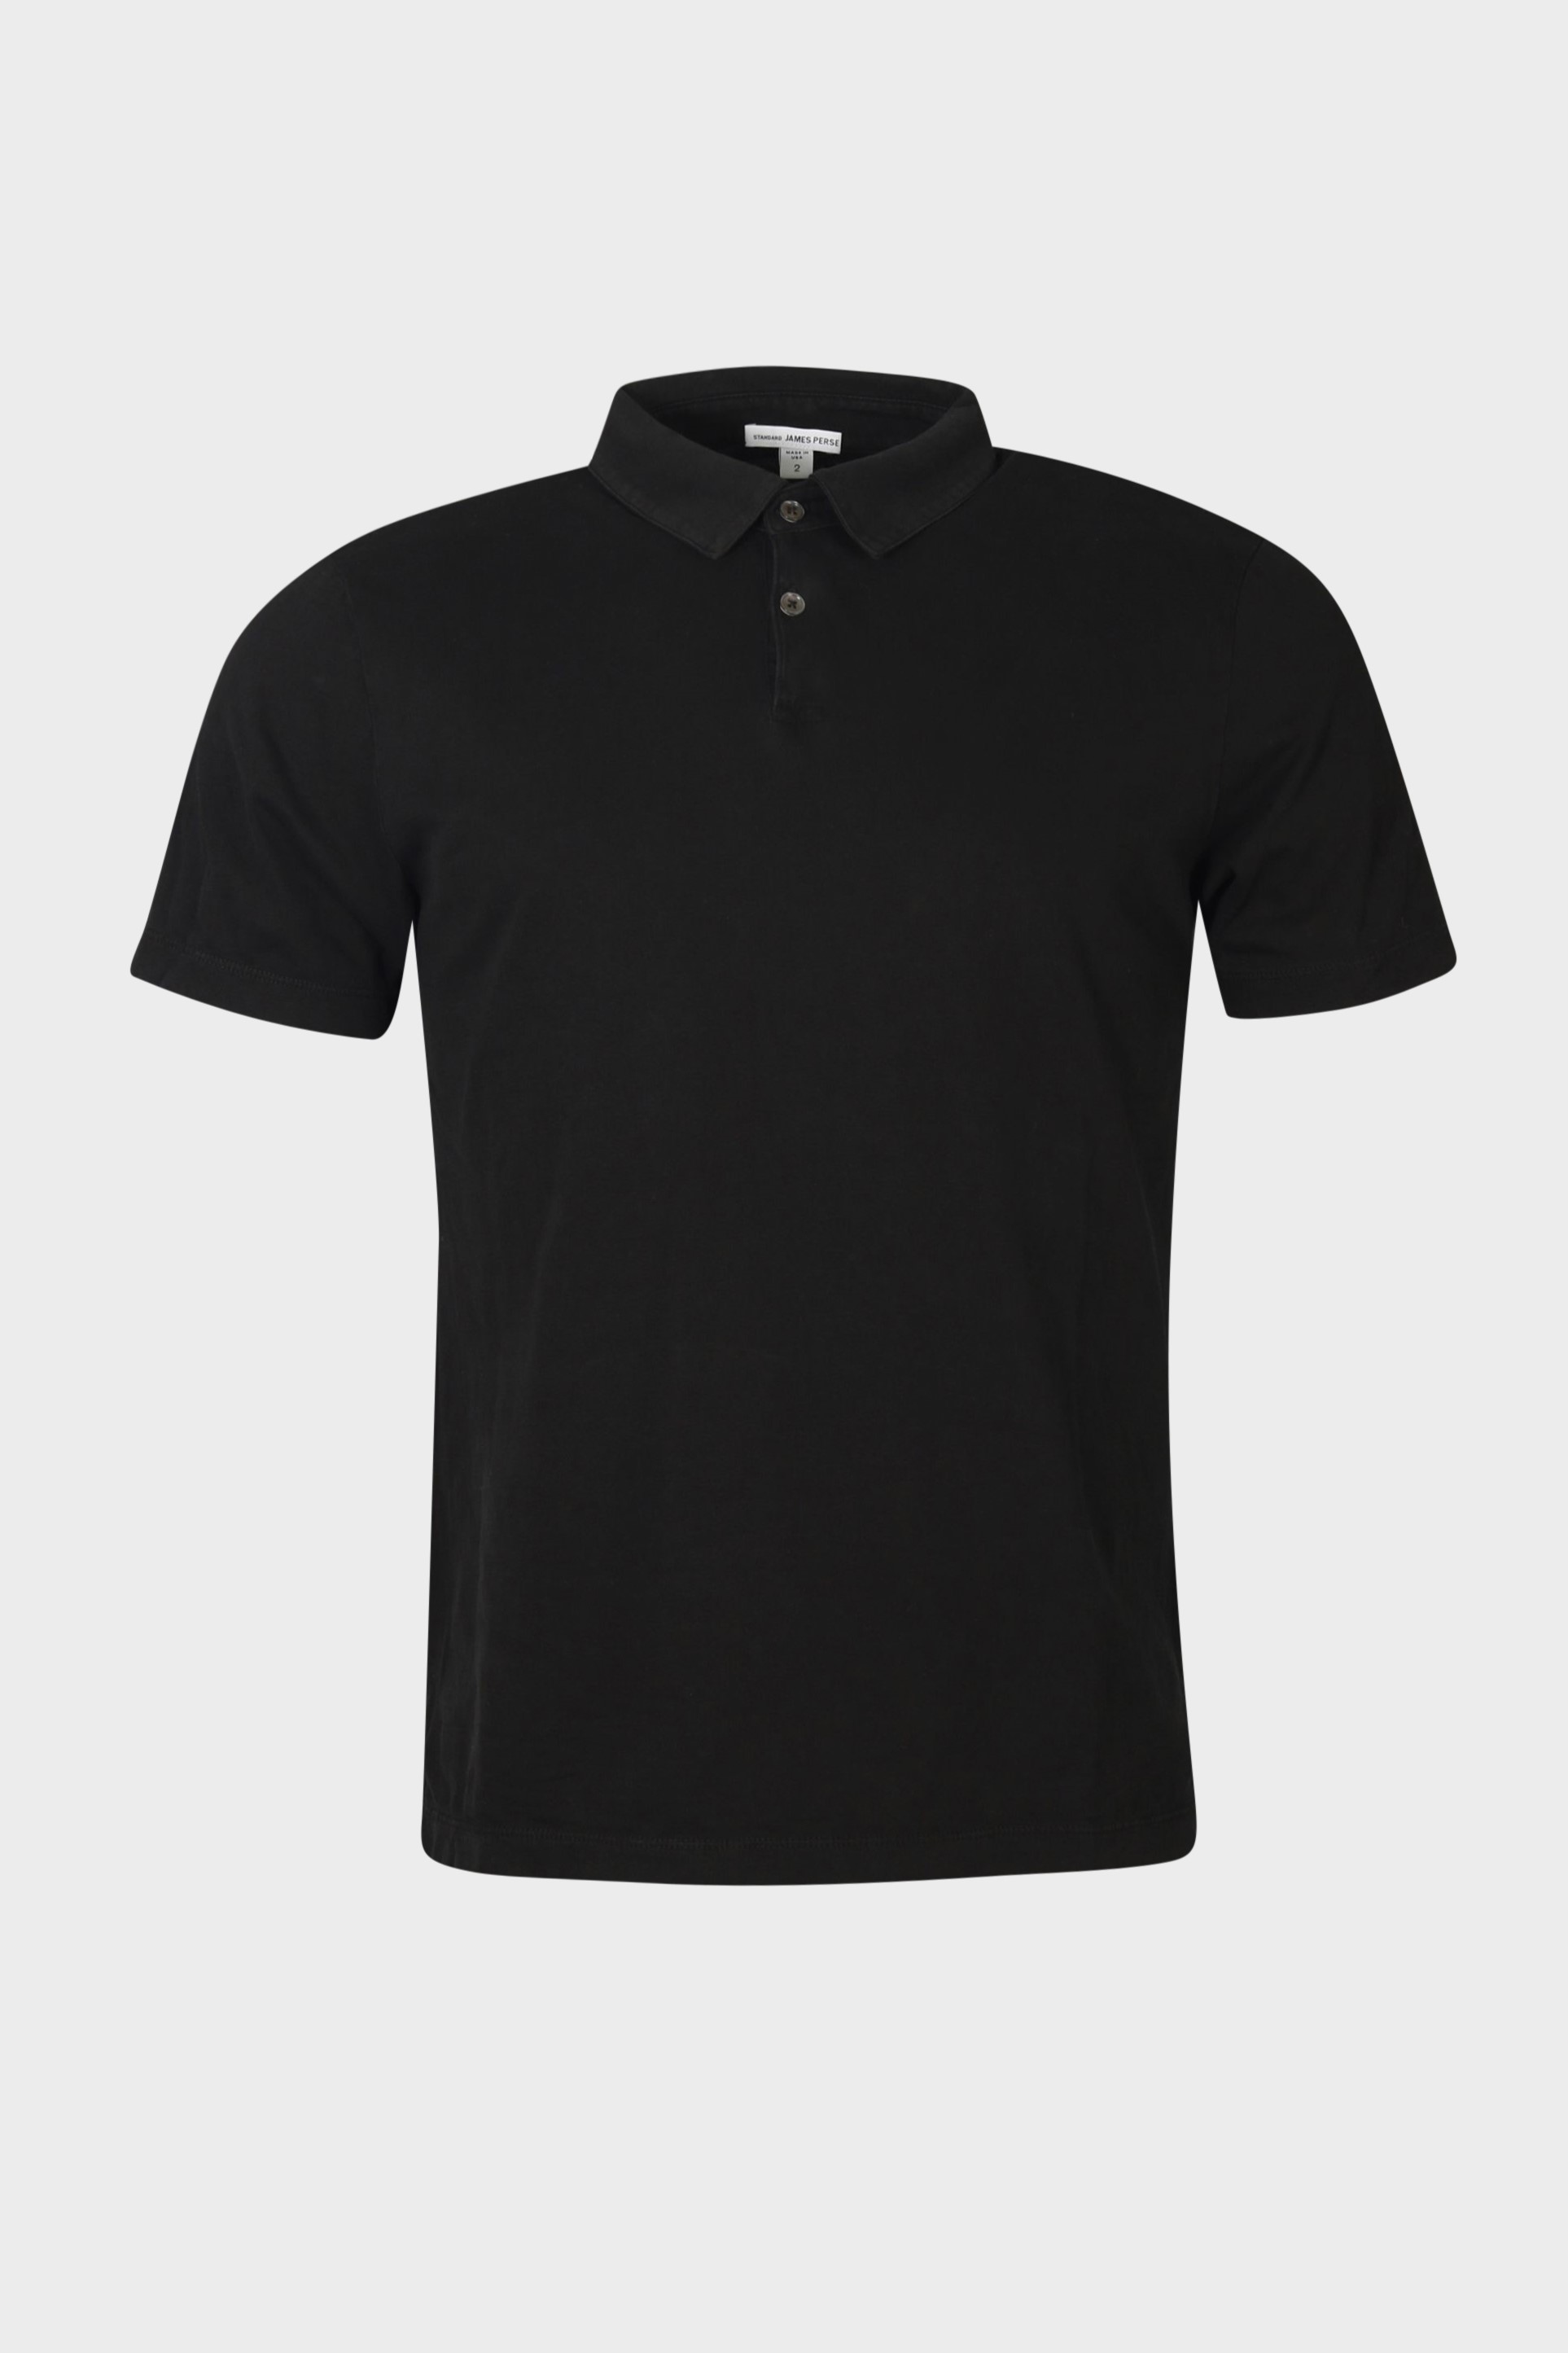 JAMES PERSE Revised Standard Polo in Black